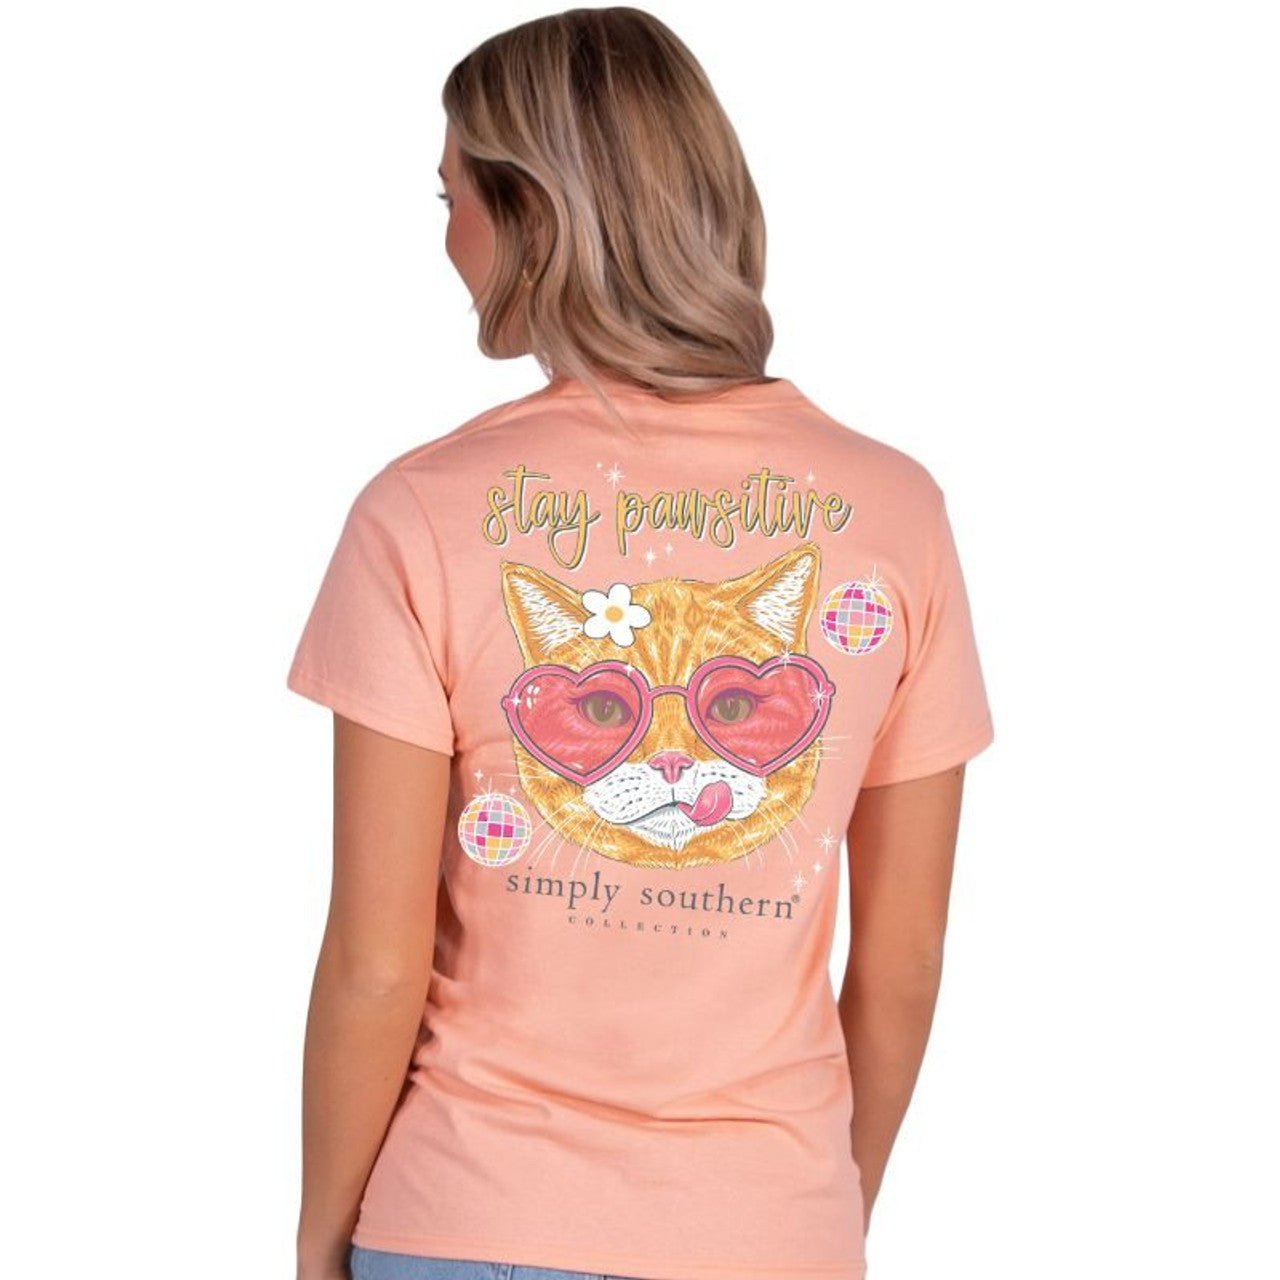 Simply Southern Stay Pawsitive Tee